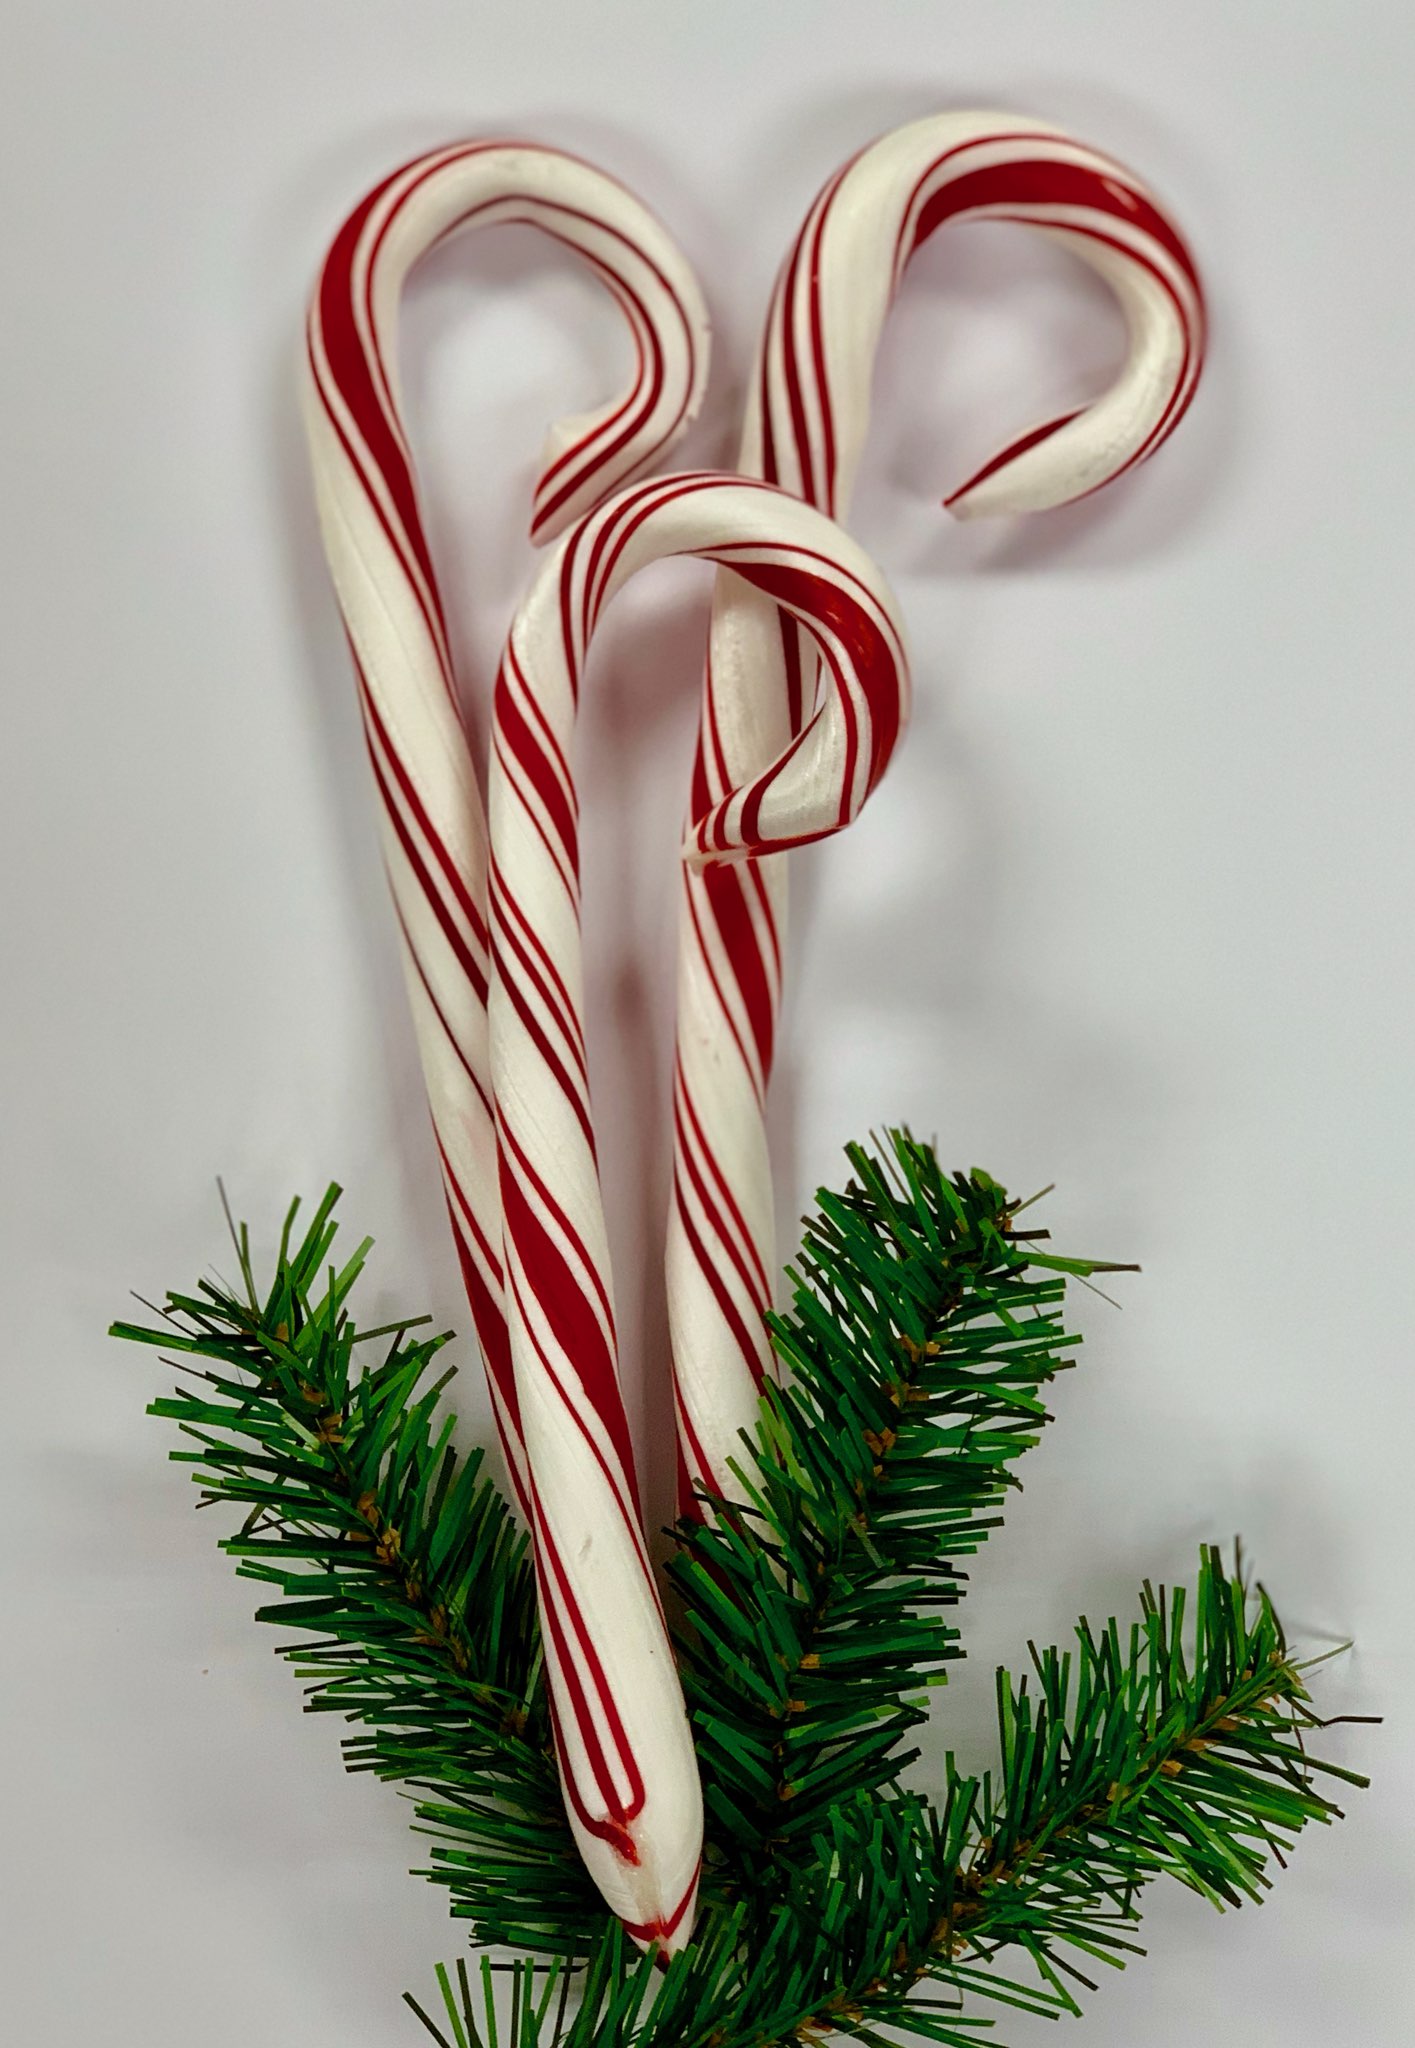 TUCKS - 8" PEPPERMINT CANDY CANE 20 CT (X)